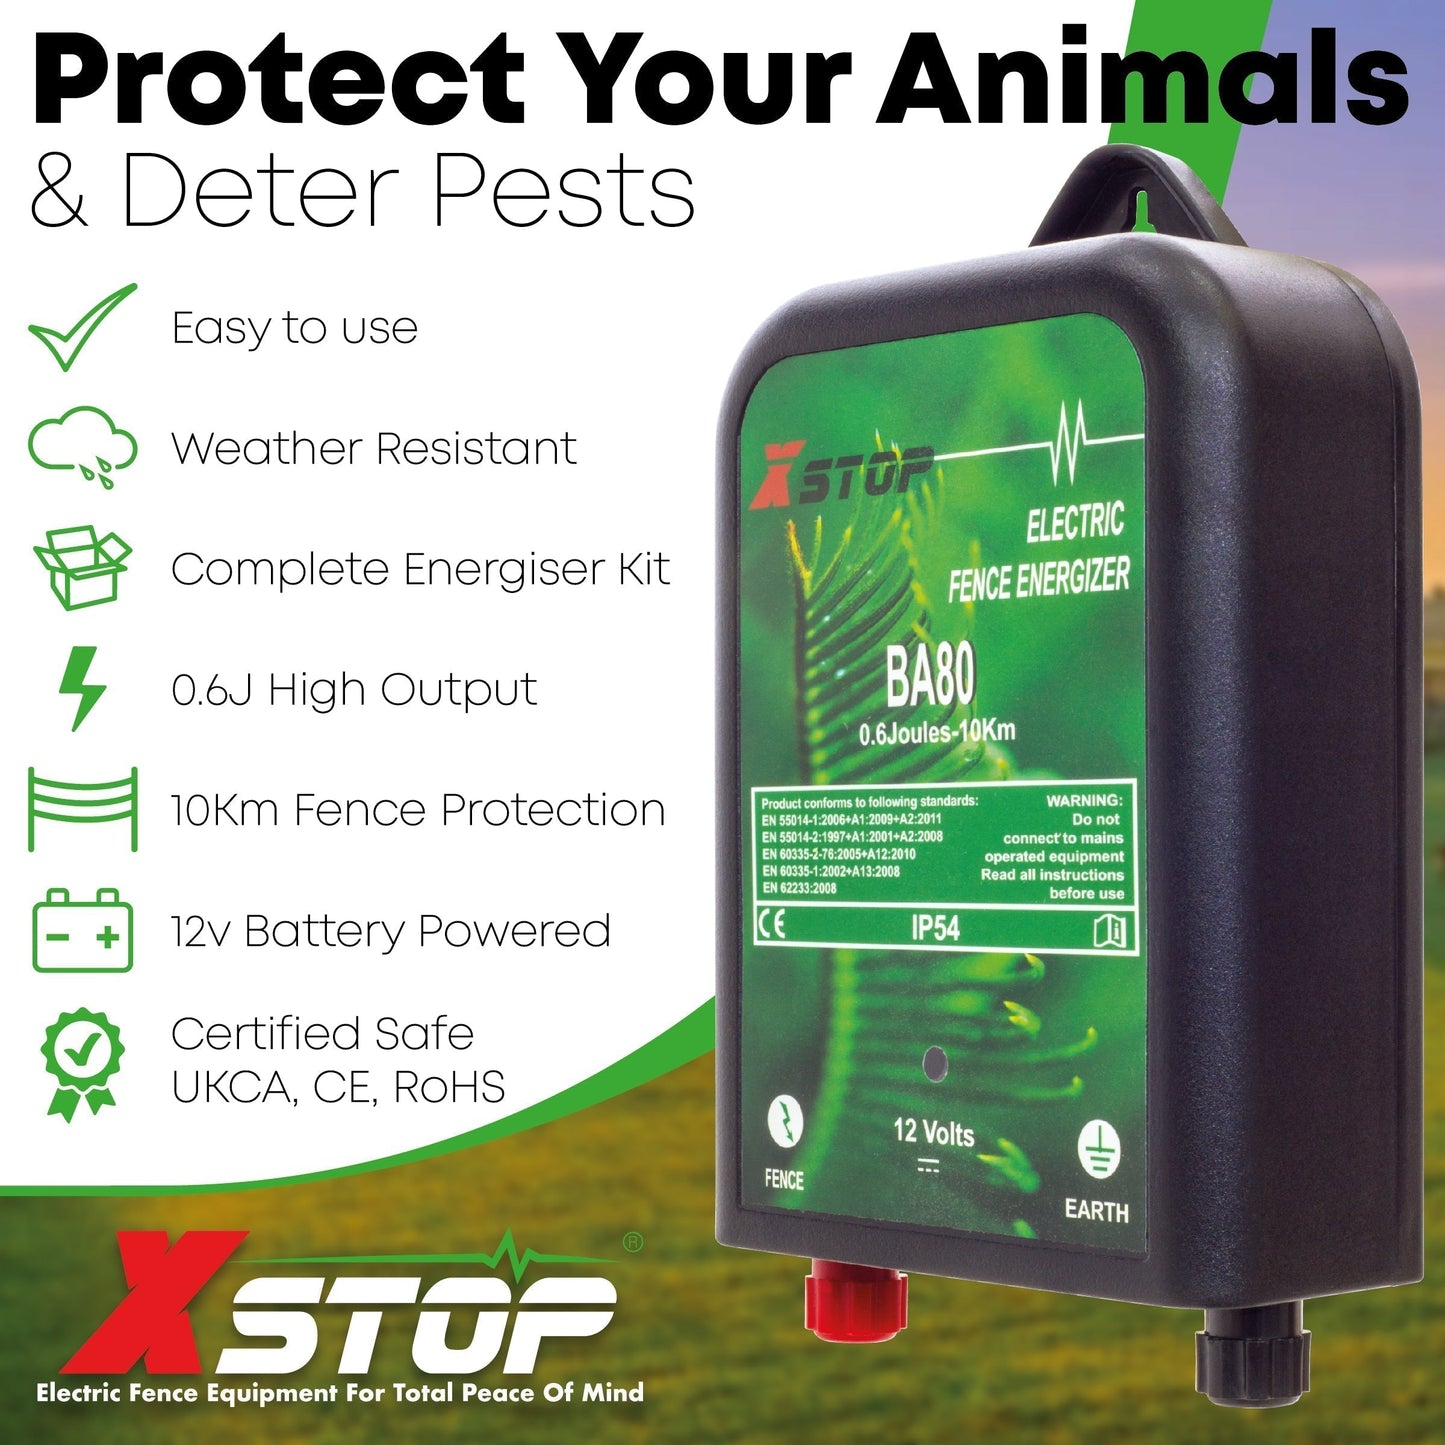 BA80 12v Battery Powered Electric Fence Energiser for Chickens 0.6J - 10Km | X-Stop